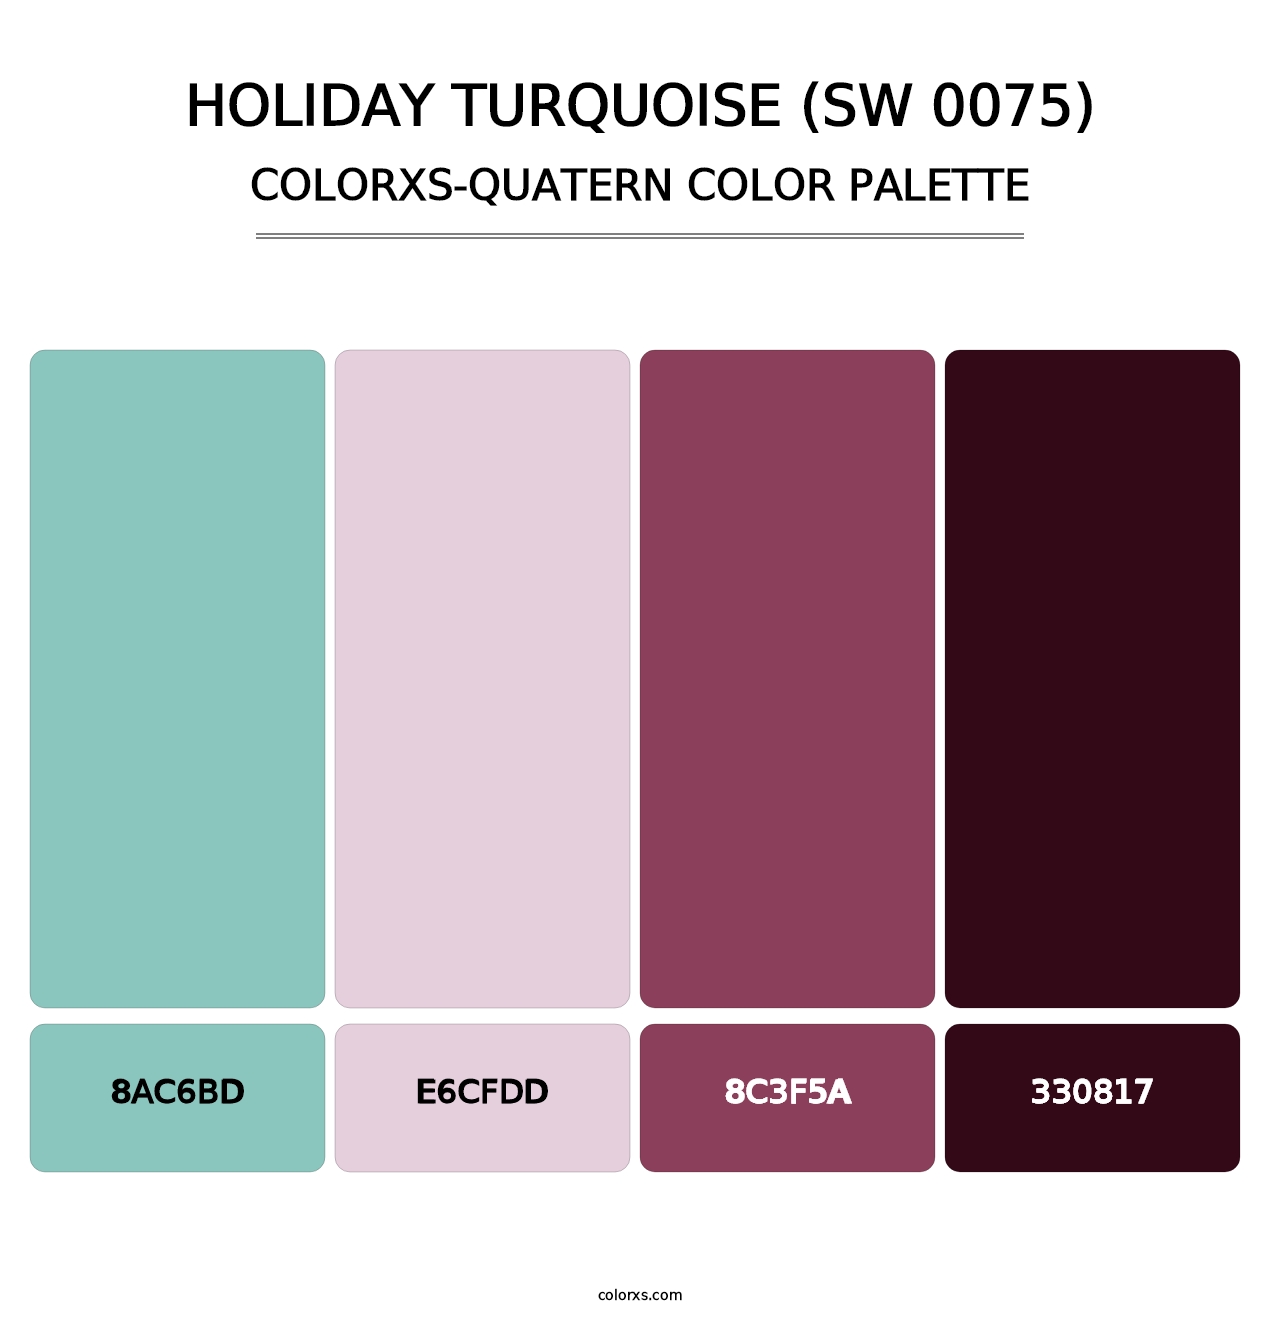 Holiday Turquoise (SW 0075) - Colorxs Quatern Palette